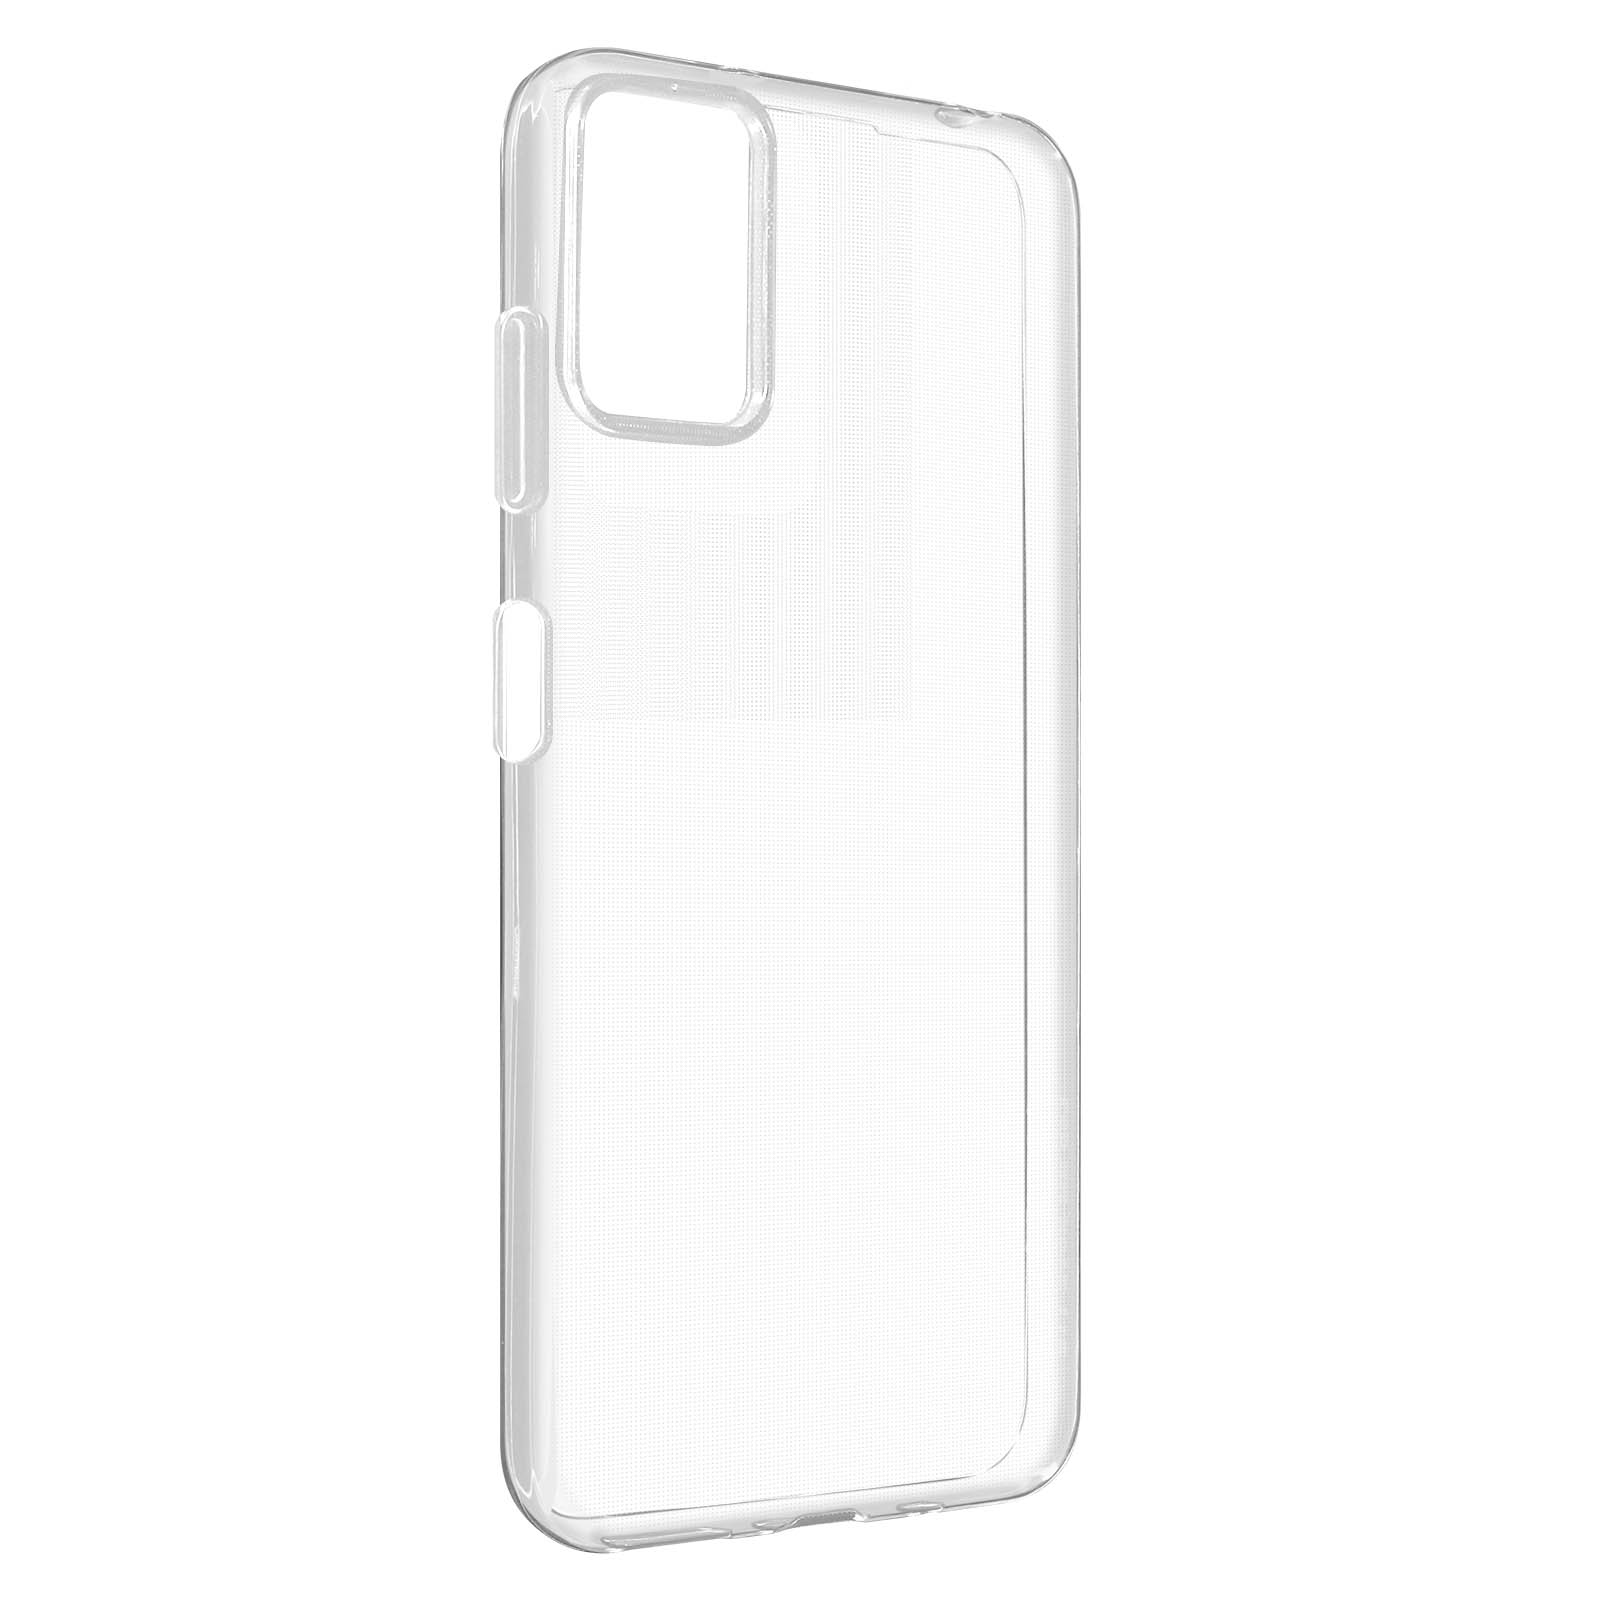 TACTICAL Clear Cover Series, Backcover, Motorola, Transparent G72, Moto